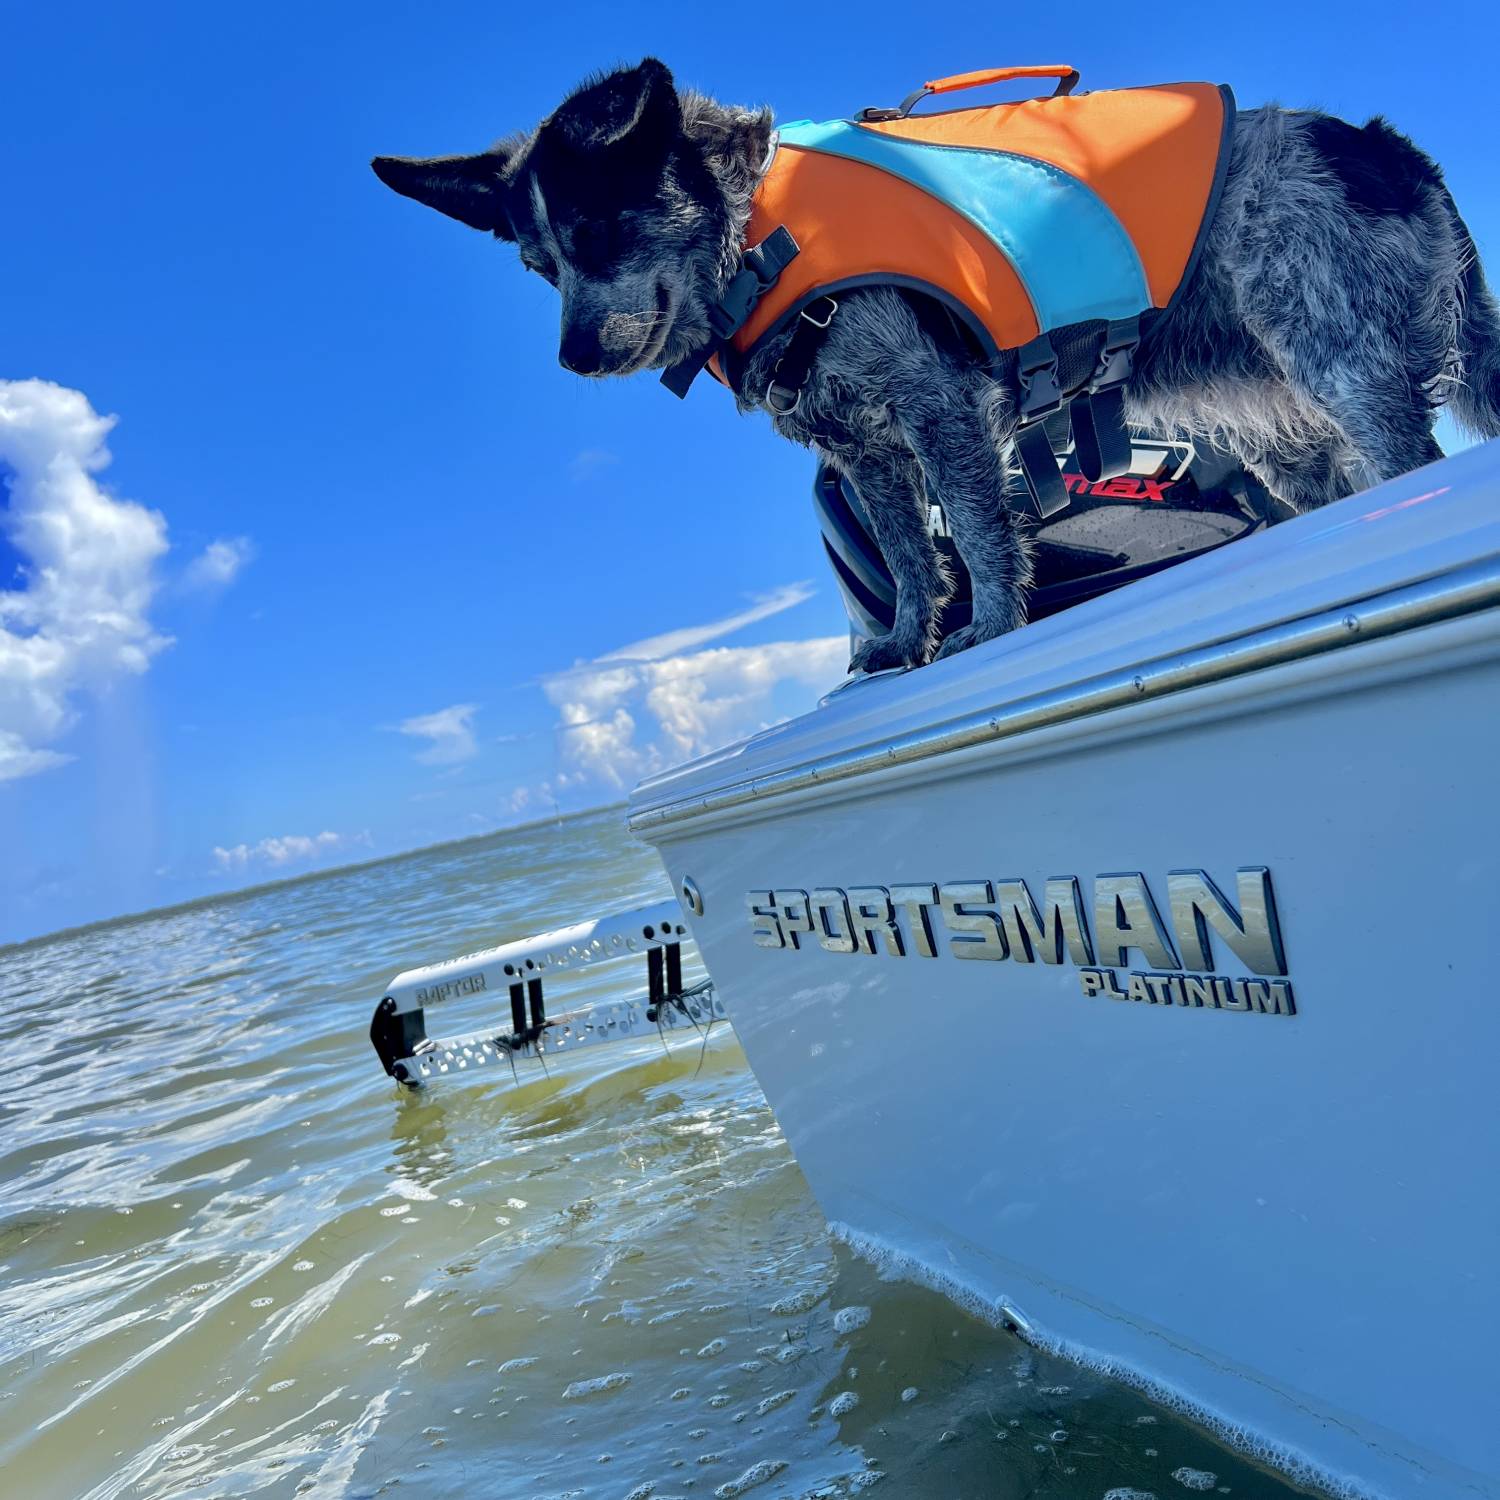 Title: Safety first. Fishing a close second. - On board their Sportsman Masters 227 Bay Boat - Location: Corpus Christi, TX. Participating in the Photo Contest #SportsmanSeptember